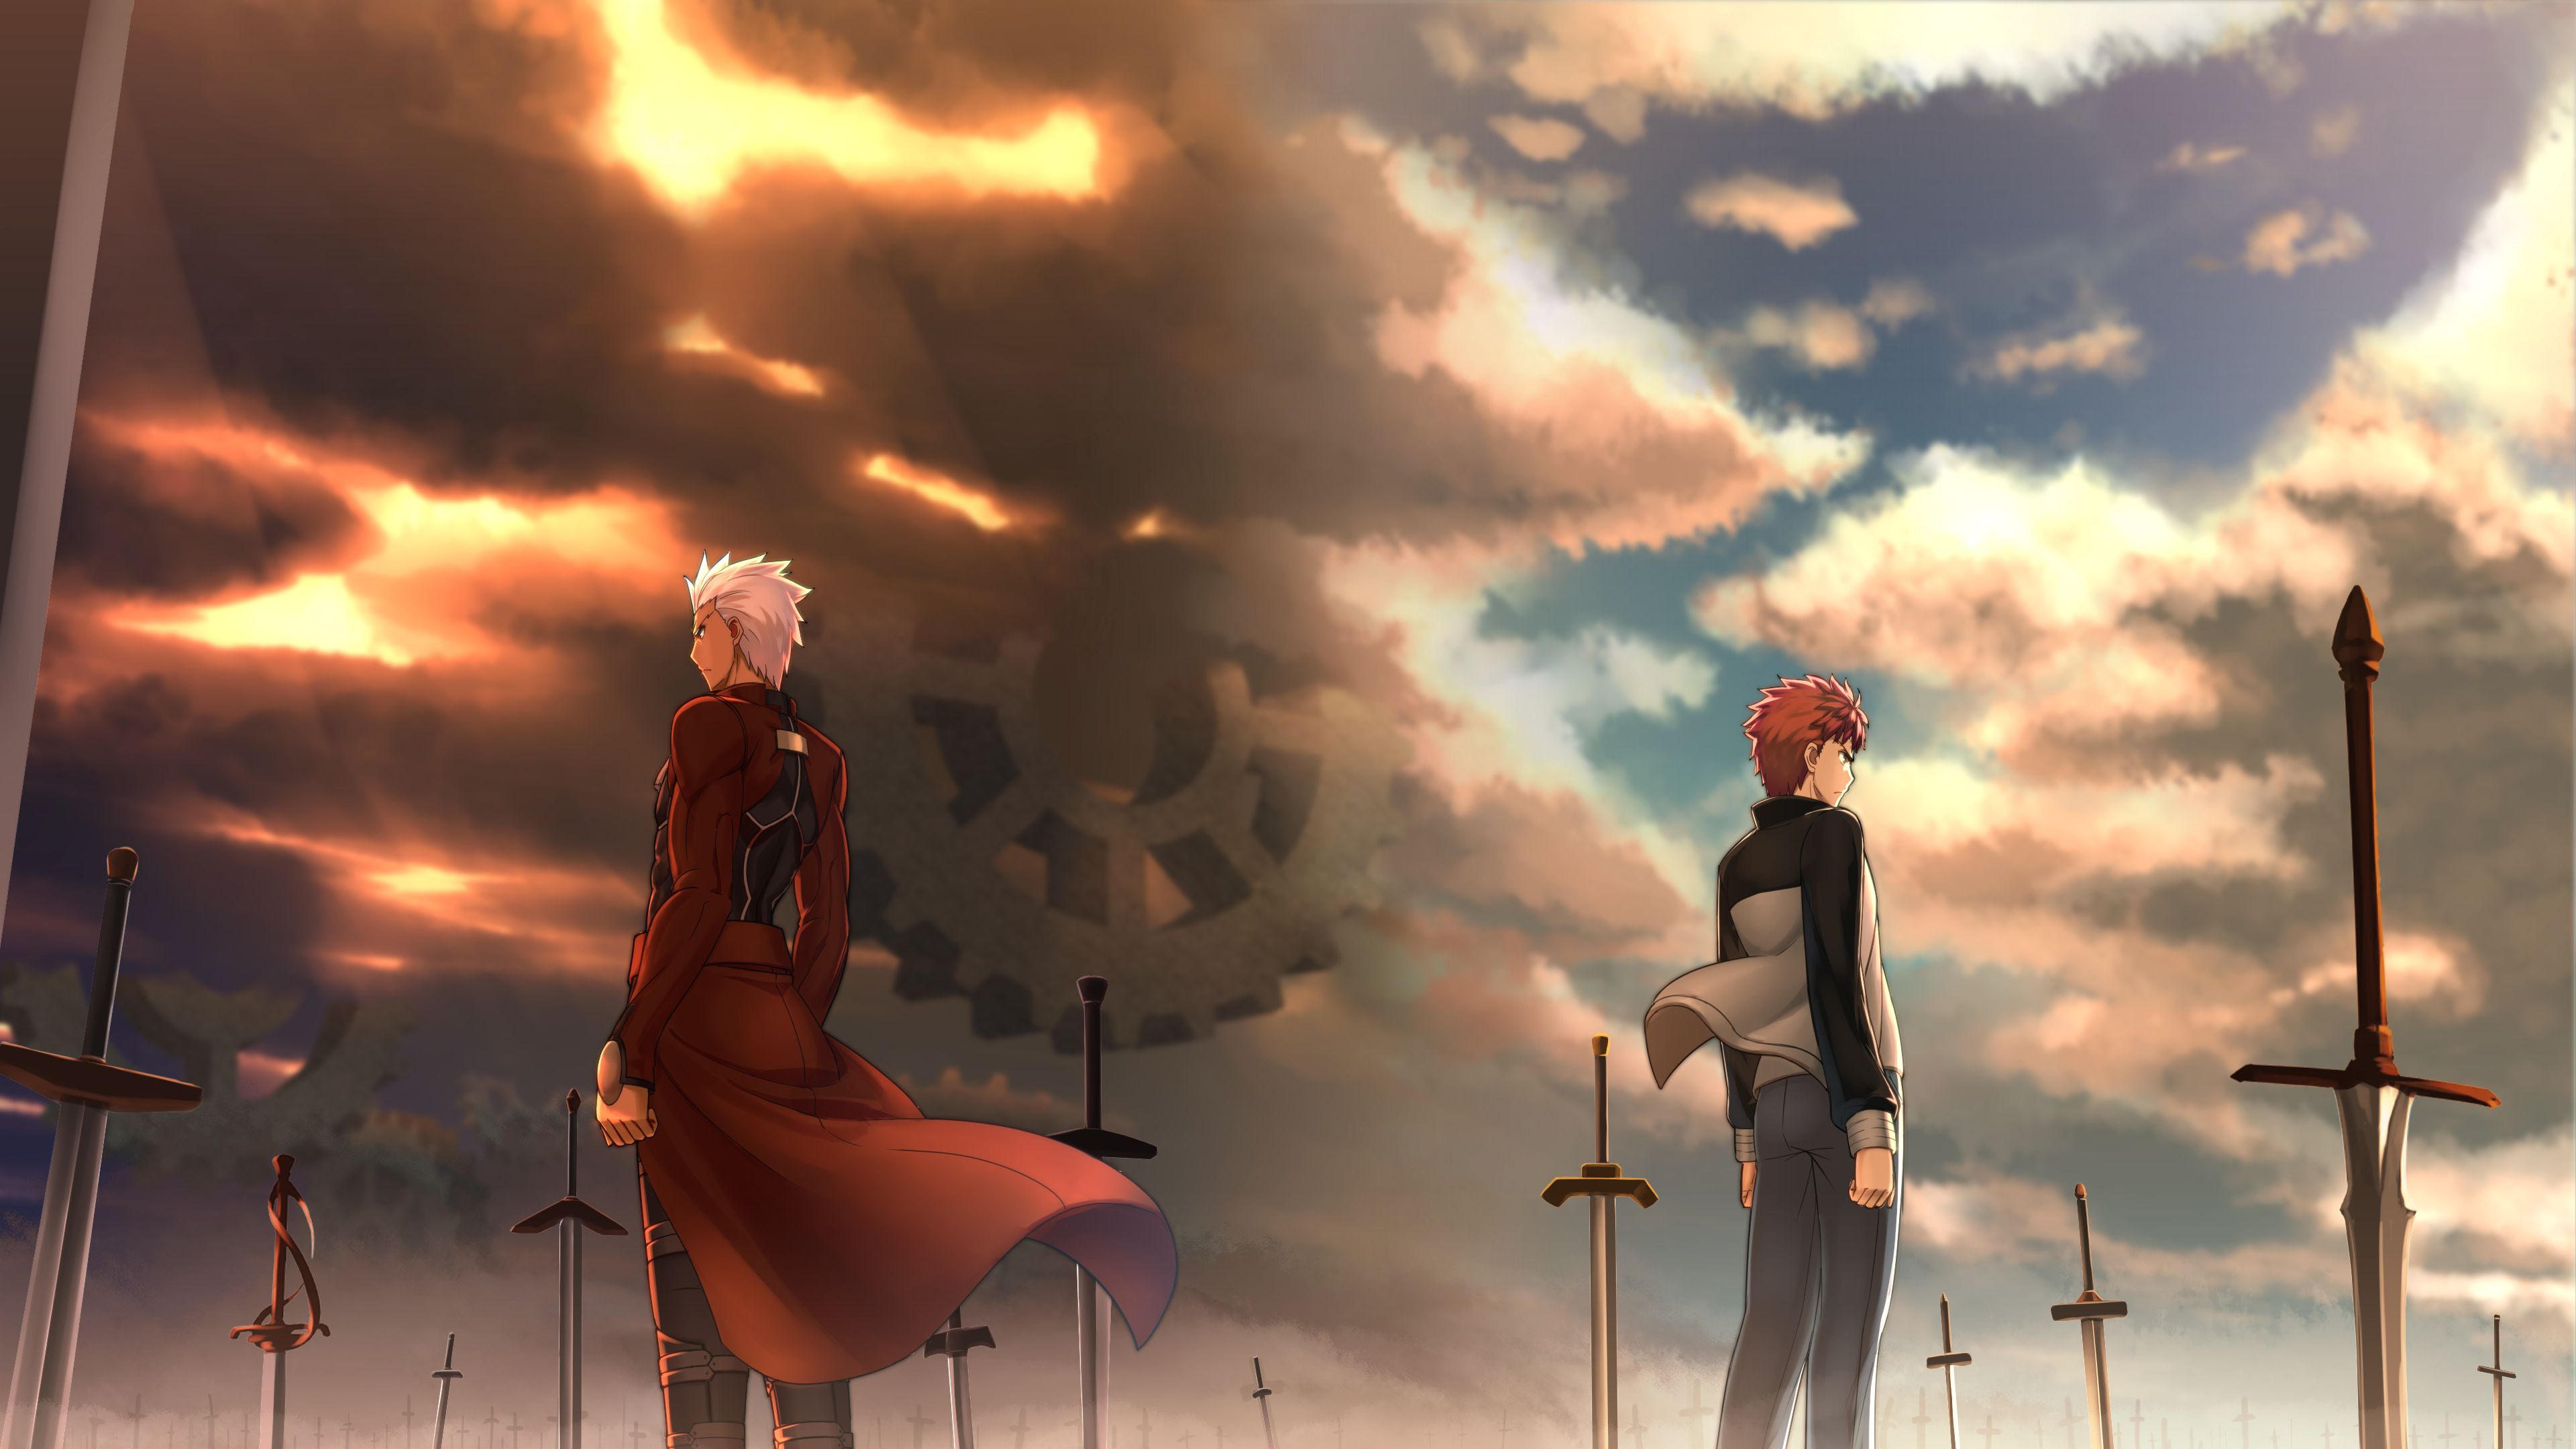 fate/stay night: unlimited blade works, archer (fate/stay night), anime, shirou emiya, fate series cellphone